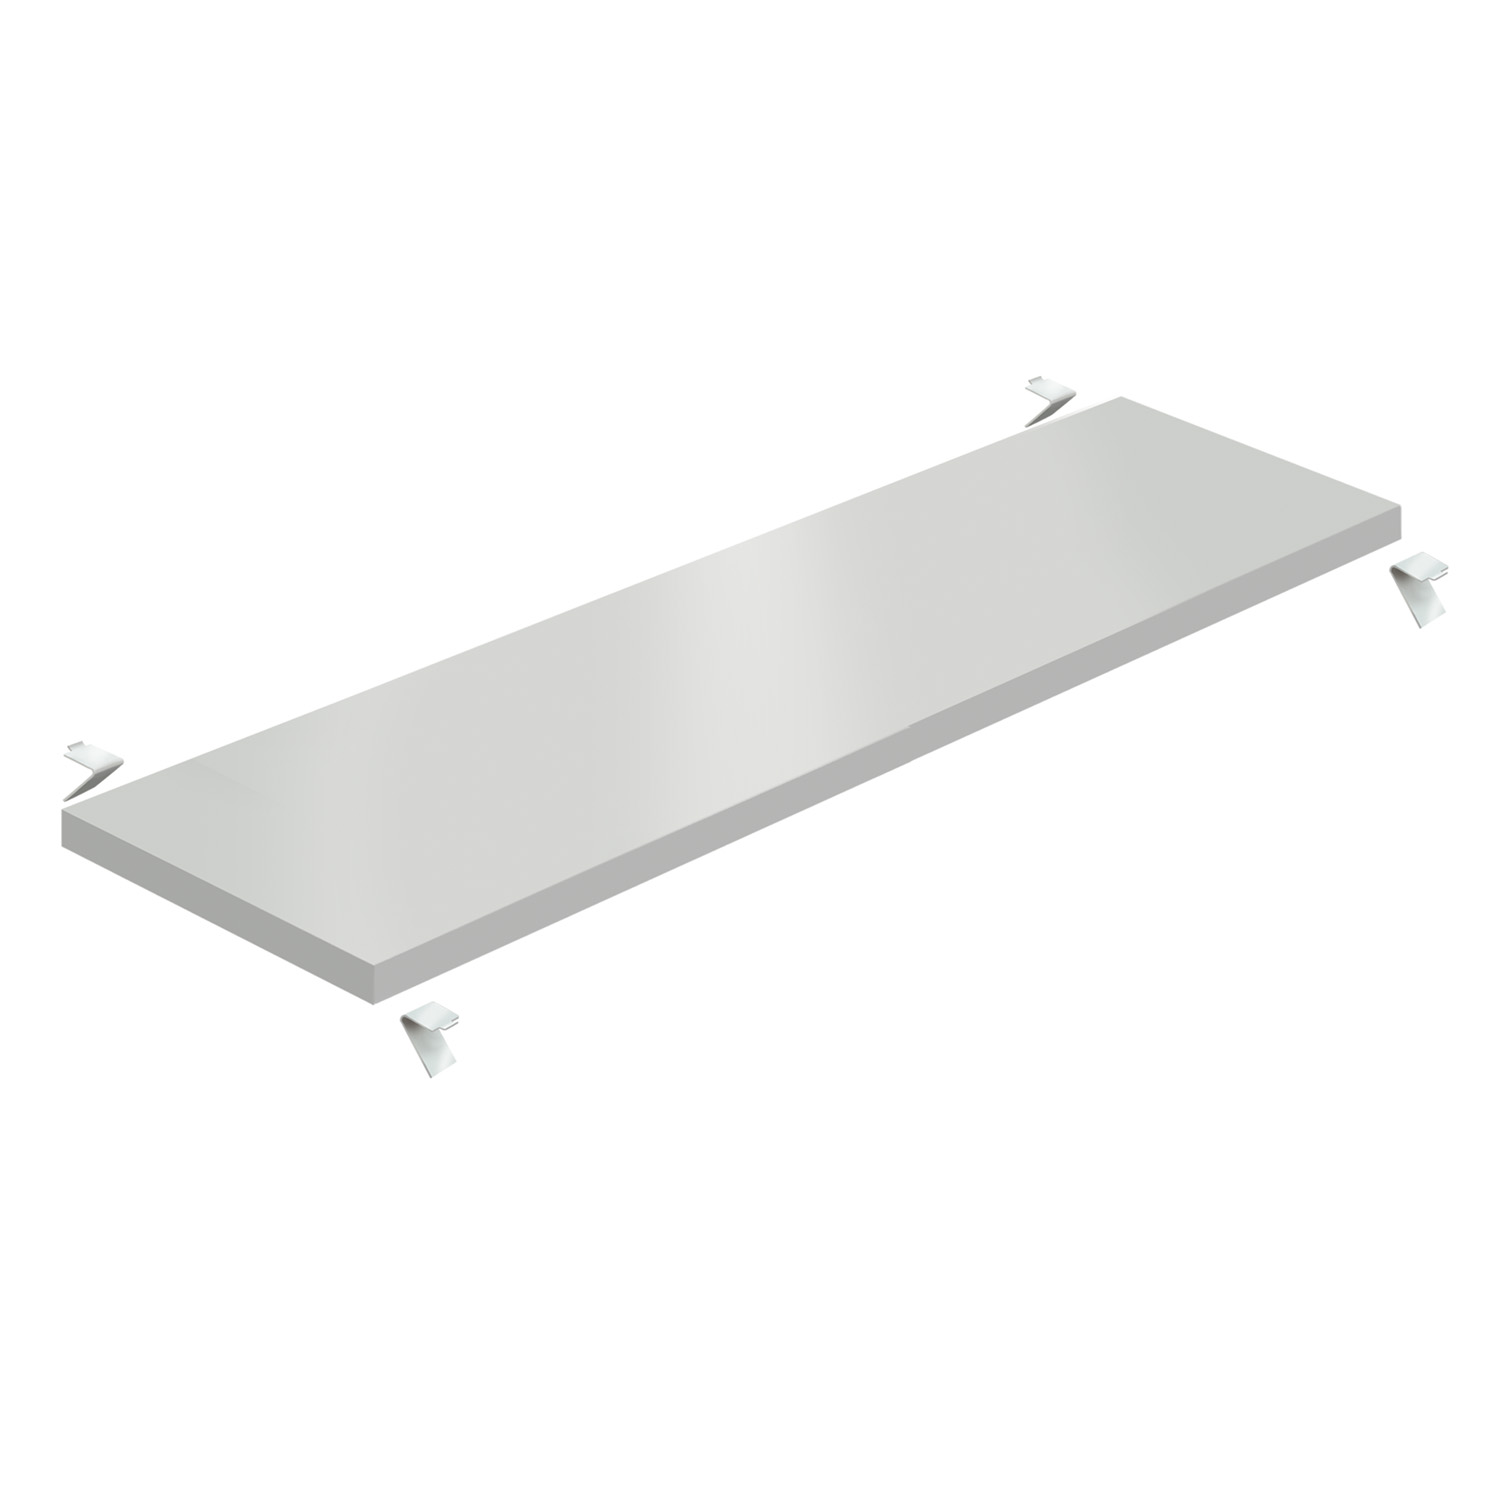 Additional shelf for RS-030 or RS-032